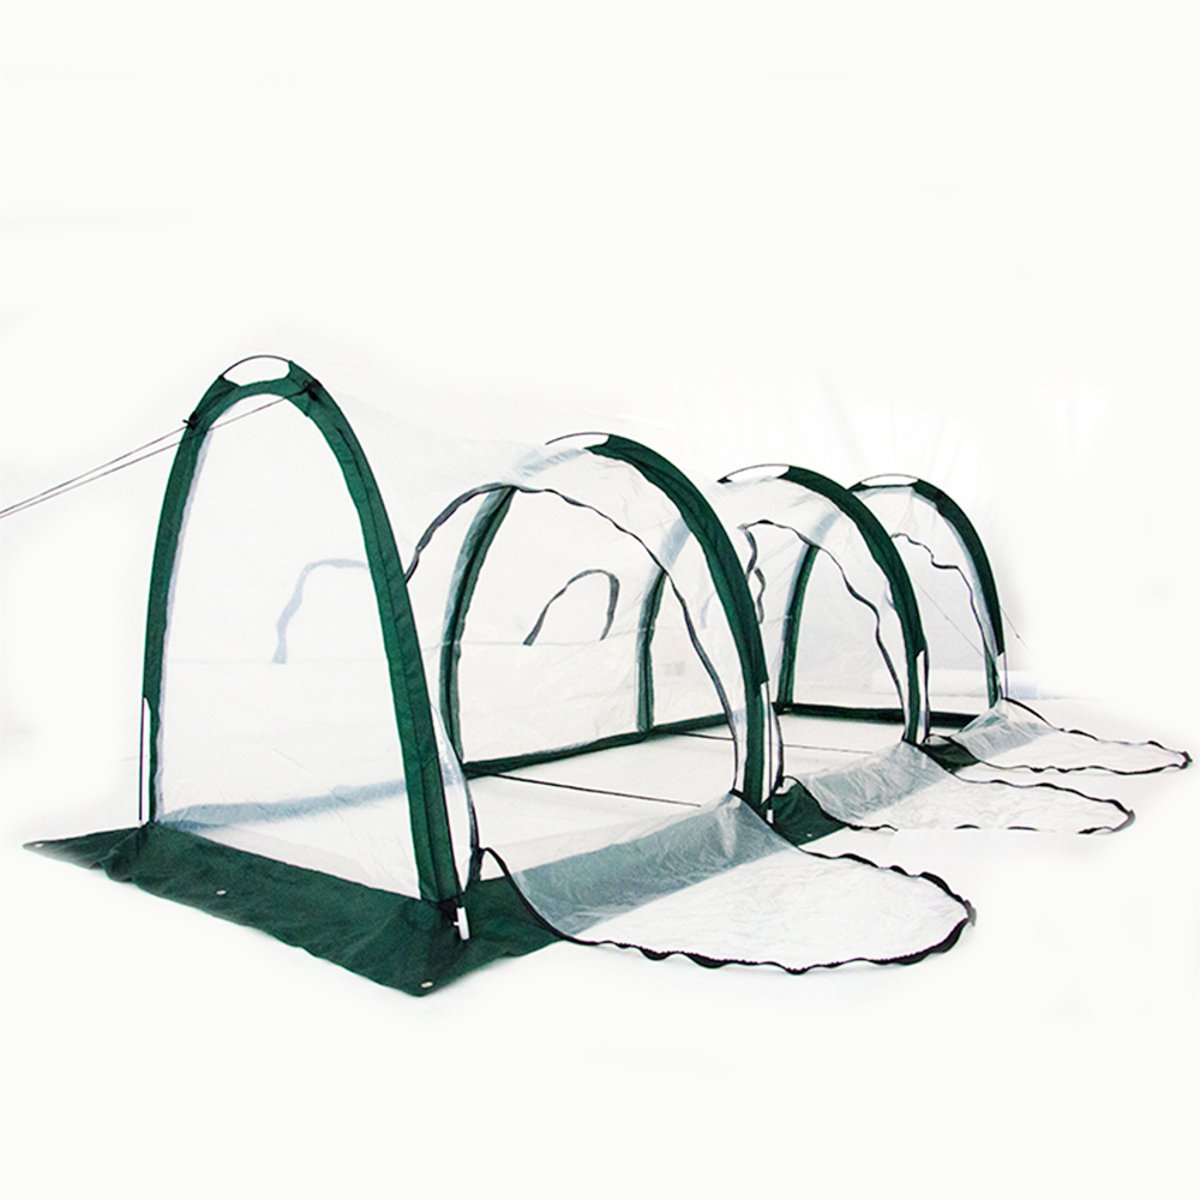 200x100x100cm-PVC-Garden-Greenhouse-Cover-Waterproof-Protects-Plants-Flowers-Planting-Heat-Proof-Col-1712540-3